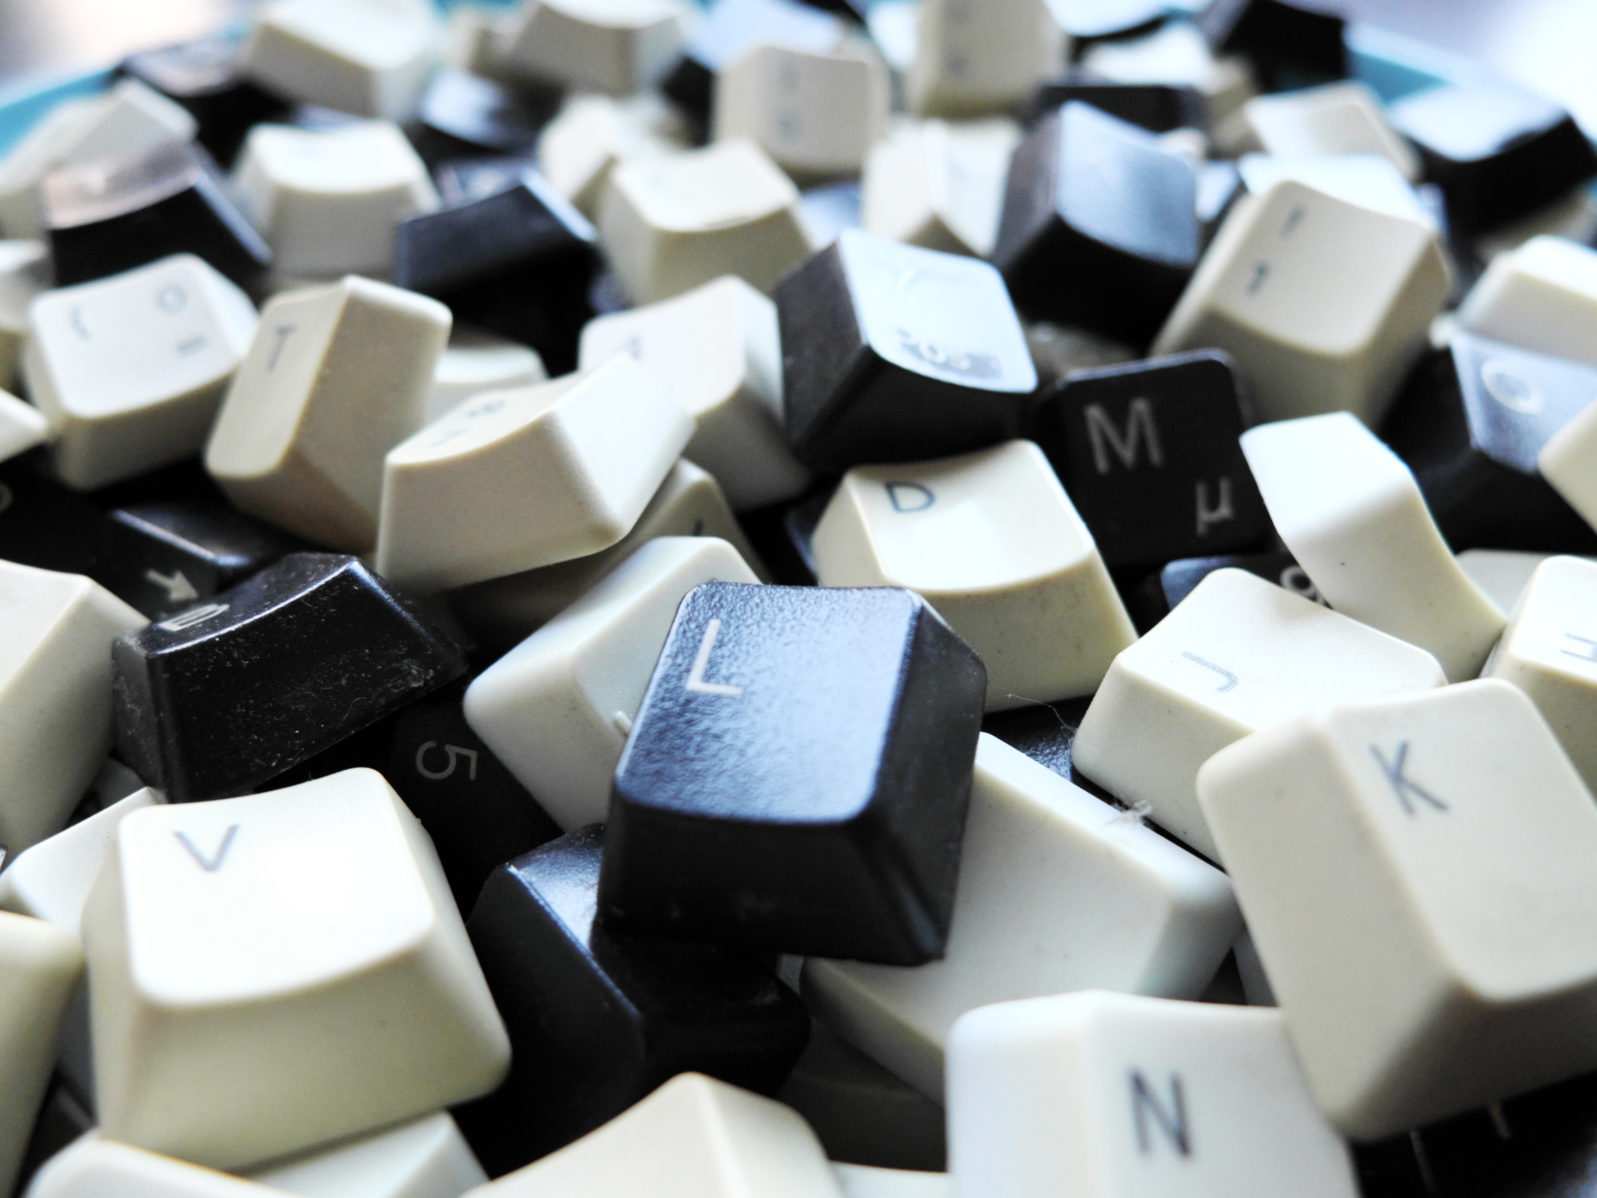 Black and white computer keyboard keys close-up. Concept of unstructured big data that need to be sorted ready to be consumed by machine learning model for deep learning.